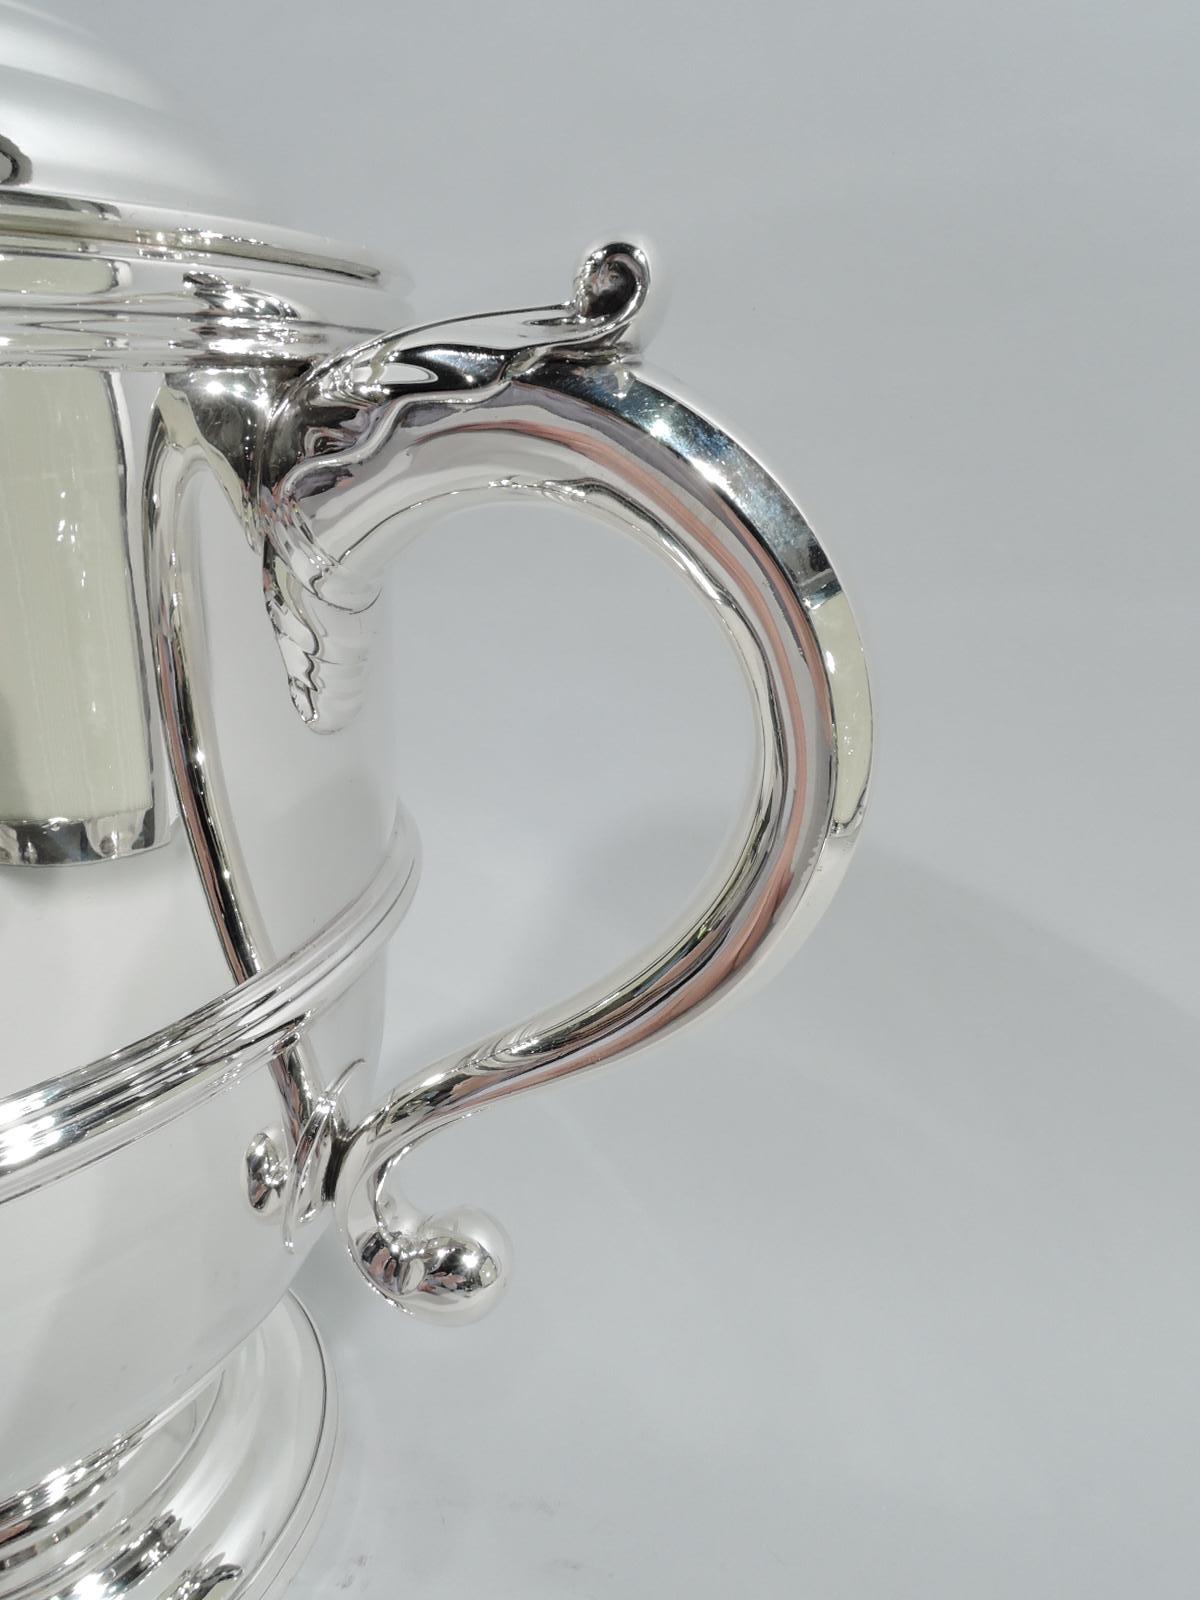 Traditional Classical Covered Urn Trophy Cup by Currier & Roby In Excellent Condition For Sale In New York, NY